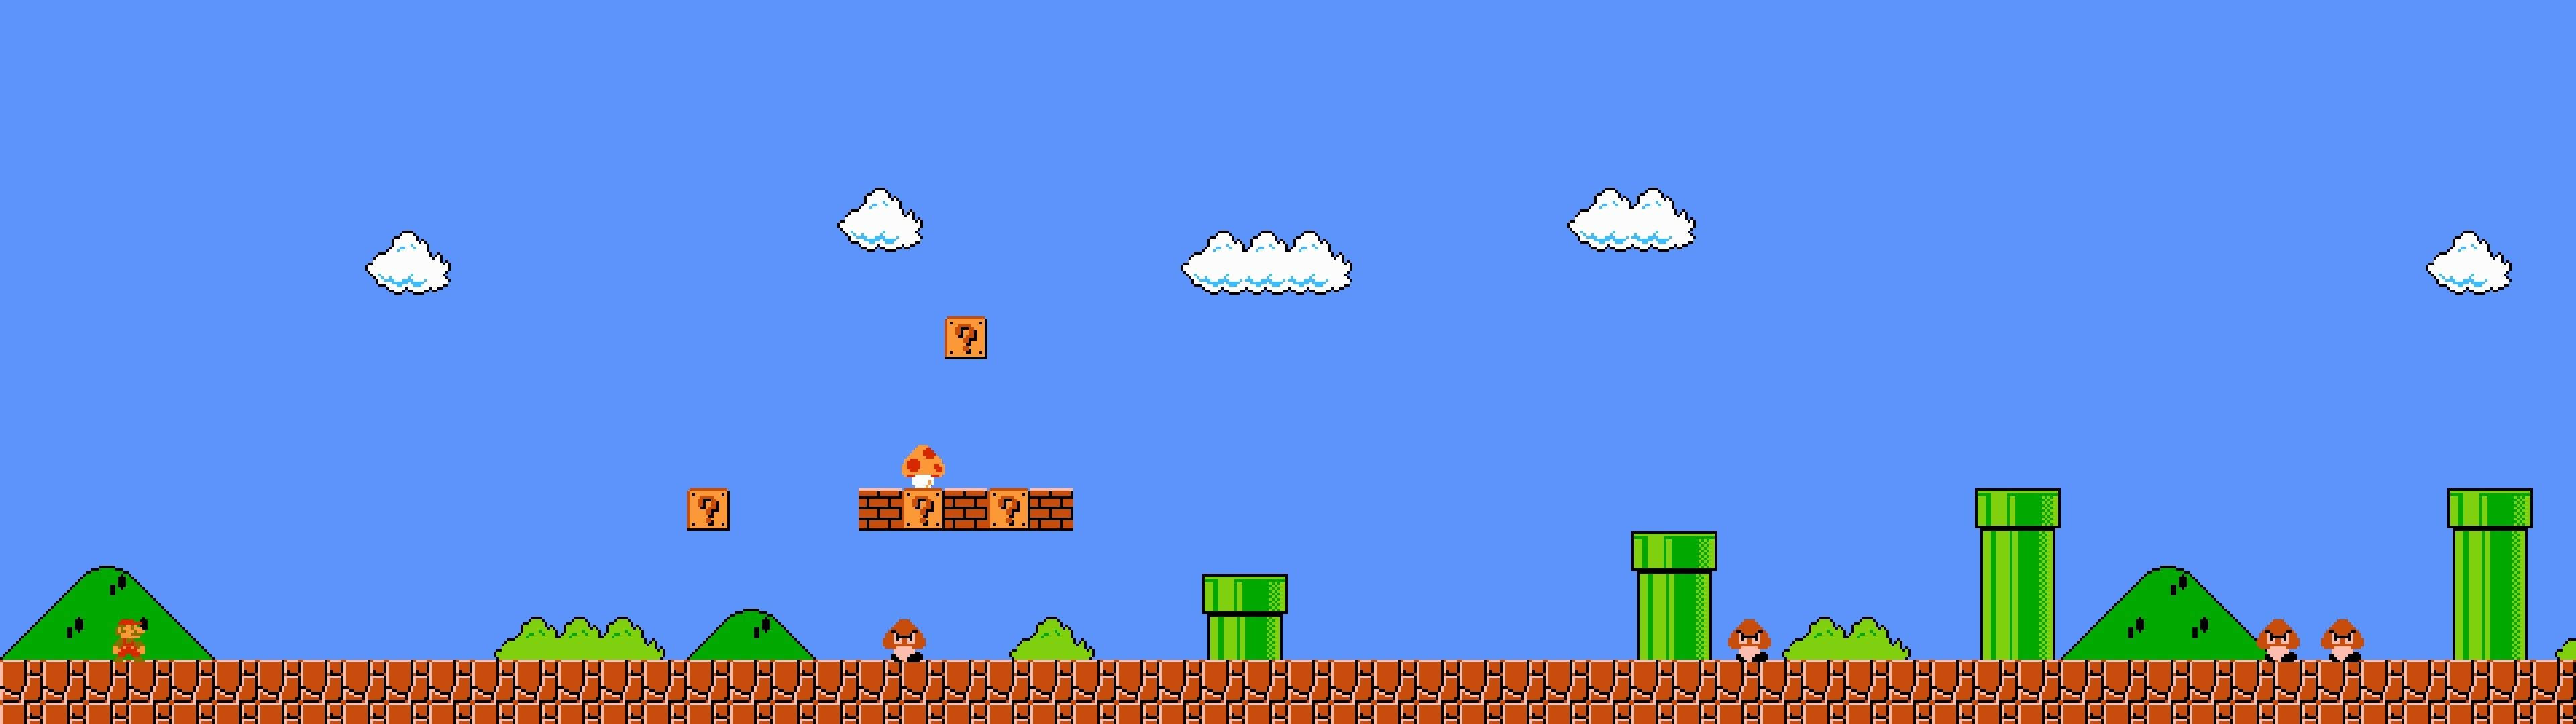 a mario bros game with a lot of water falling Wallpaper